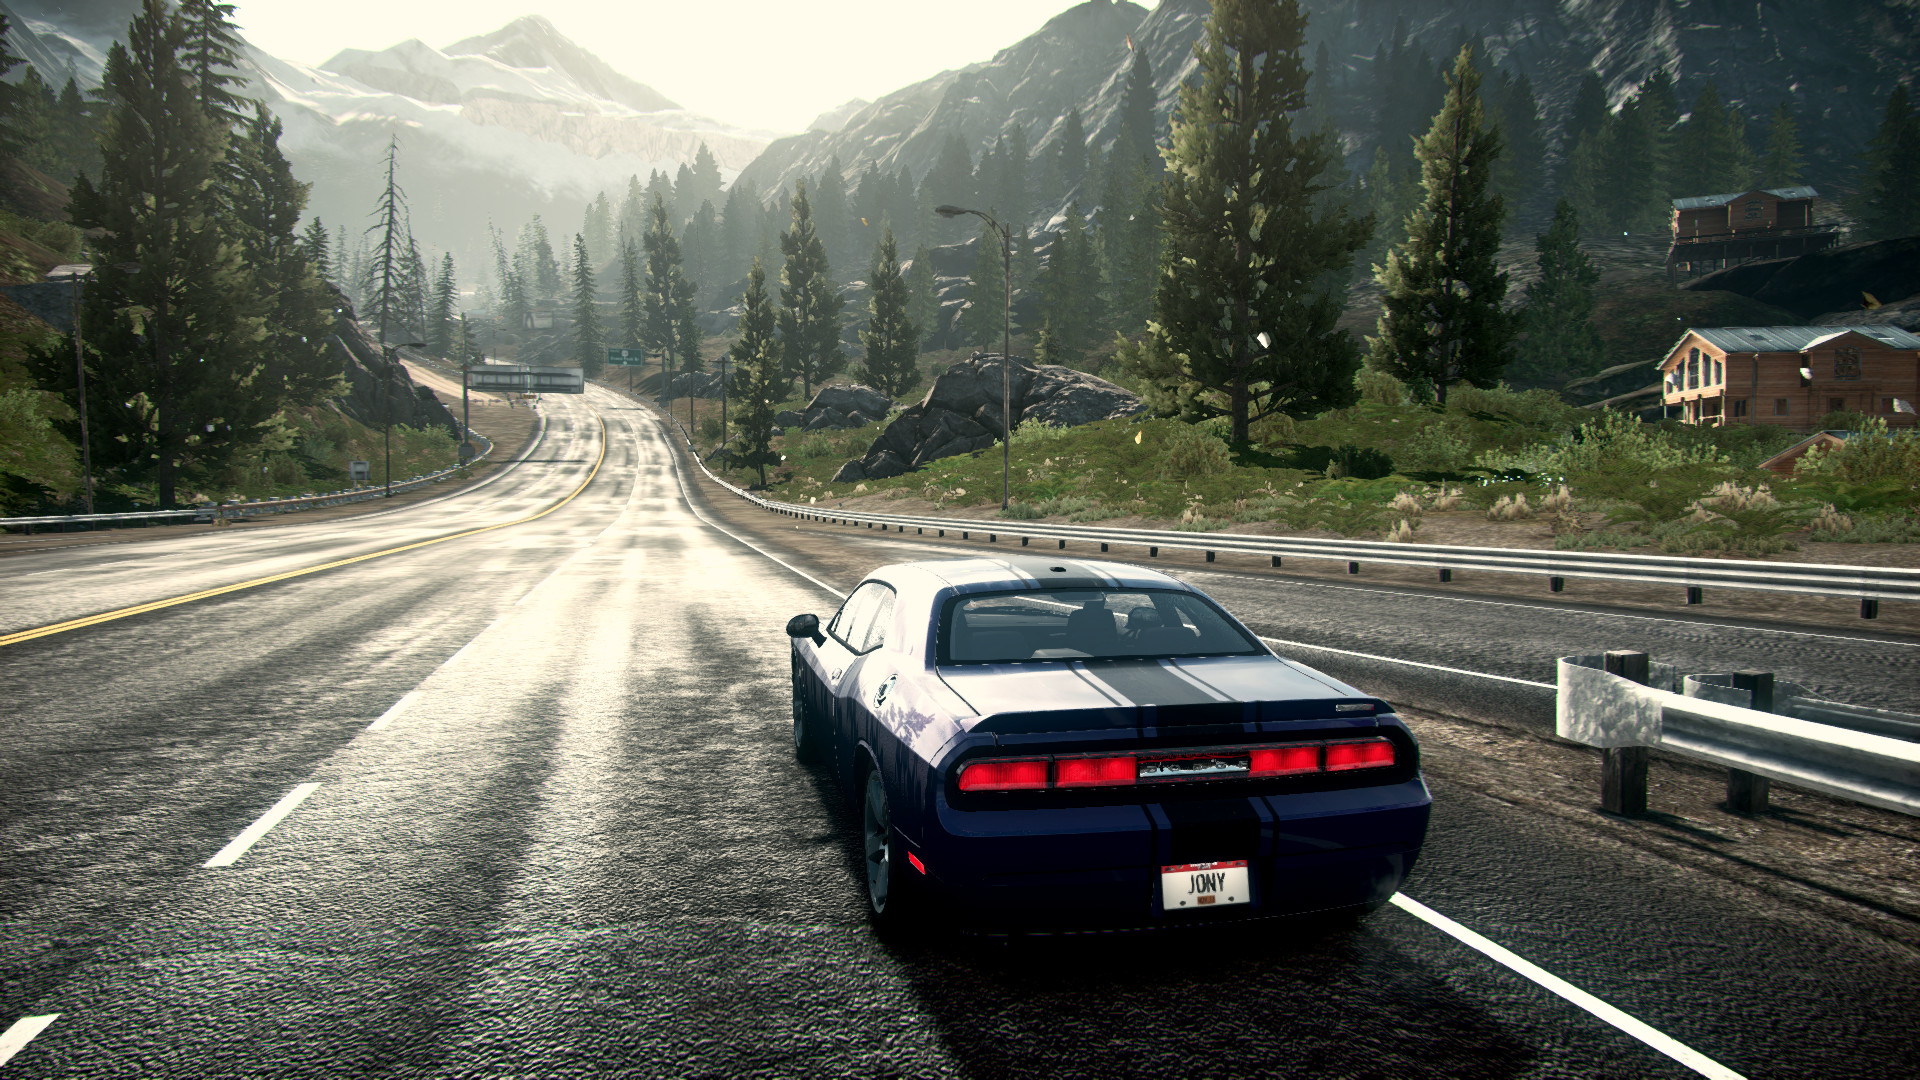 Need for speed rivals soundtrack kickass torrent cherryh foreigner series kindle torrent